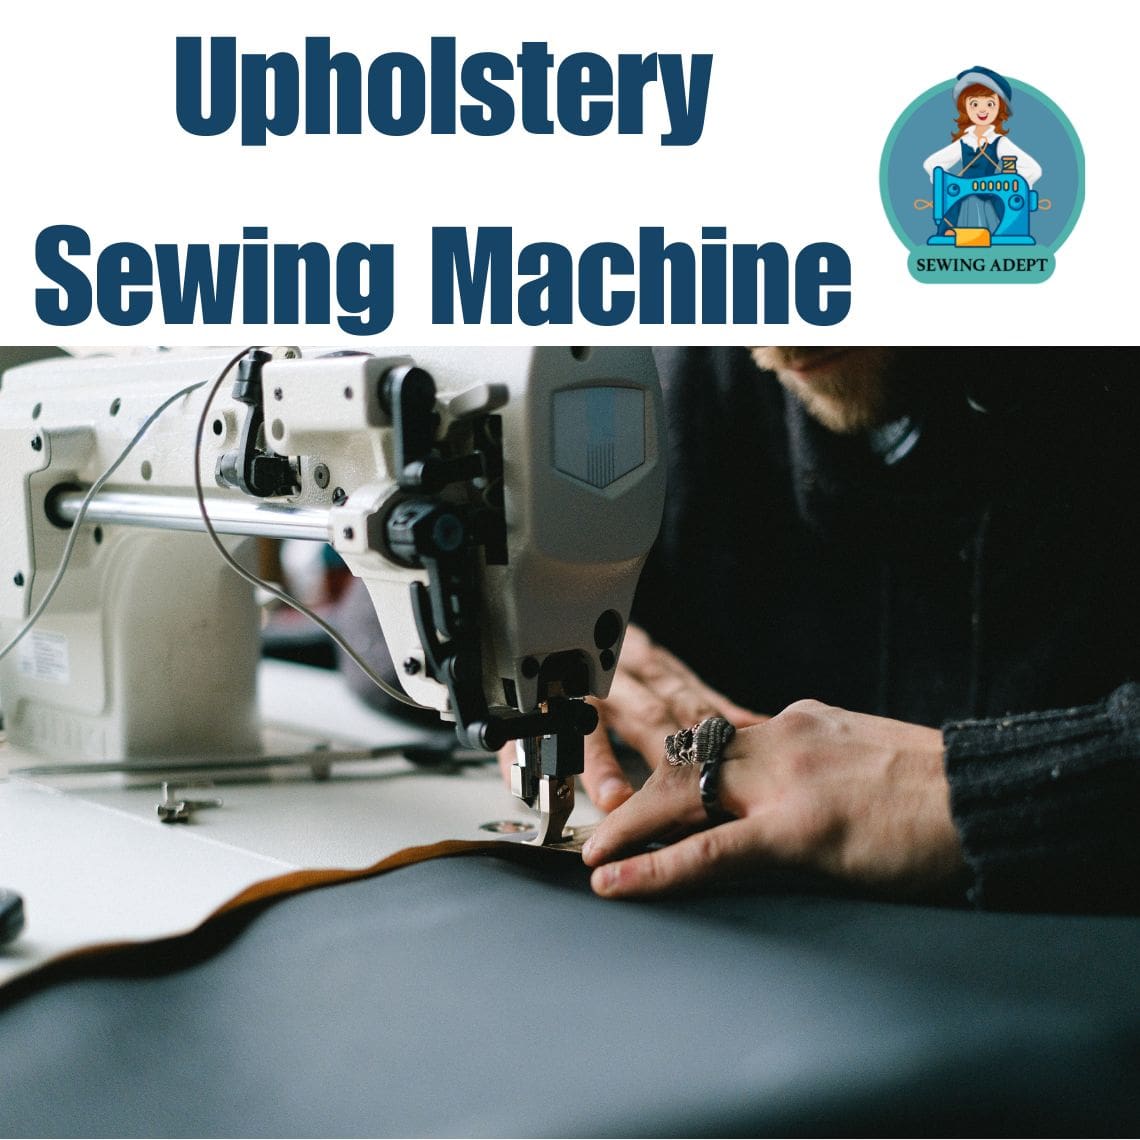 Upholstery-Sewing-Machine-Powerhouse-for-Heavy-Duty-Projects-1